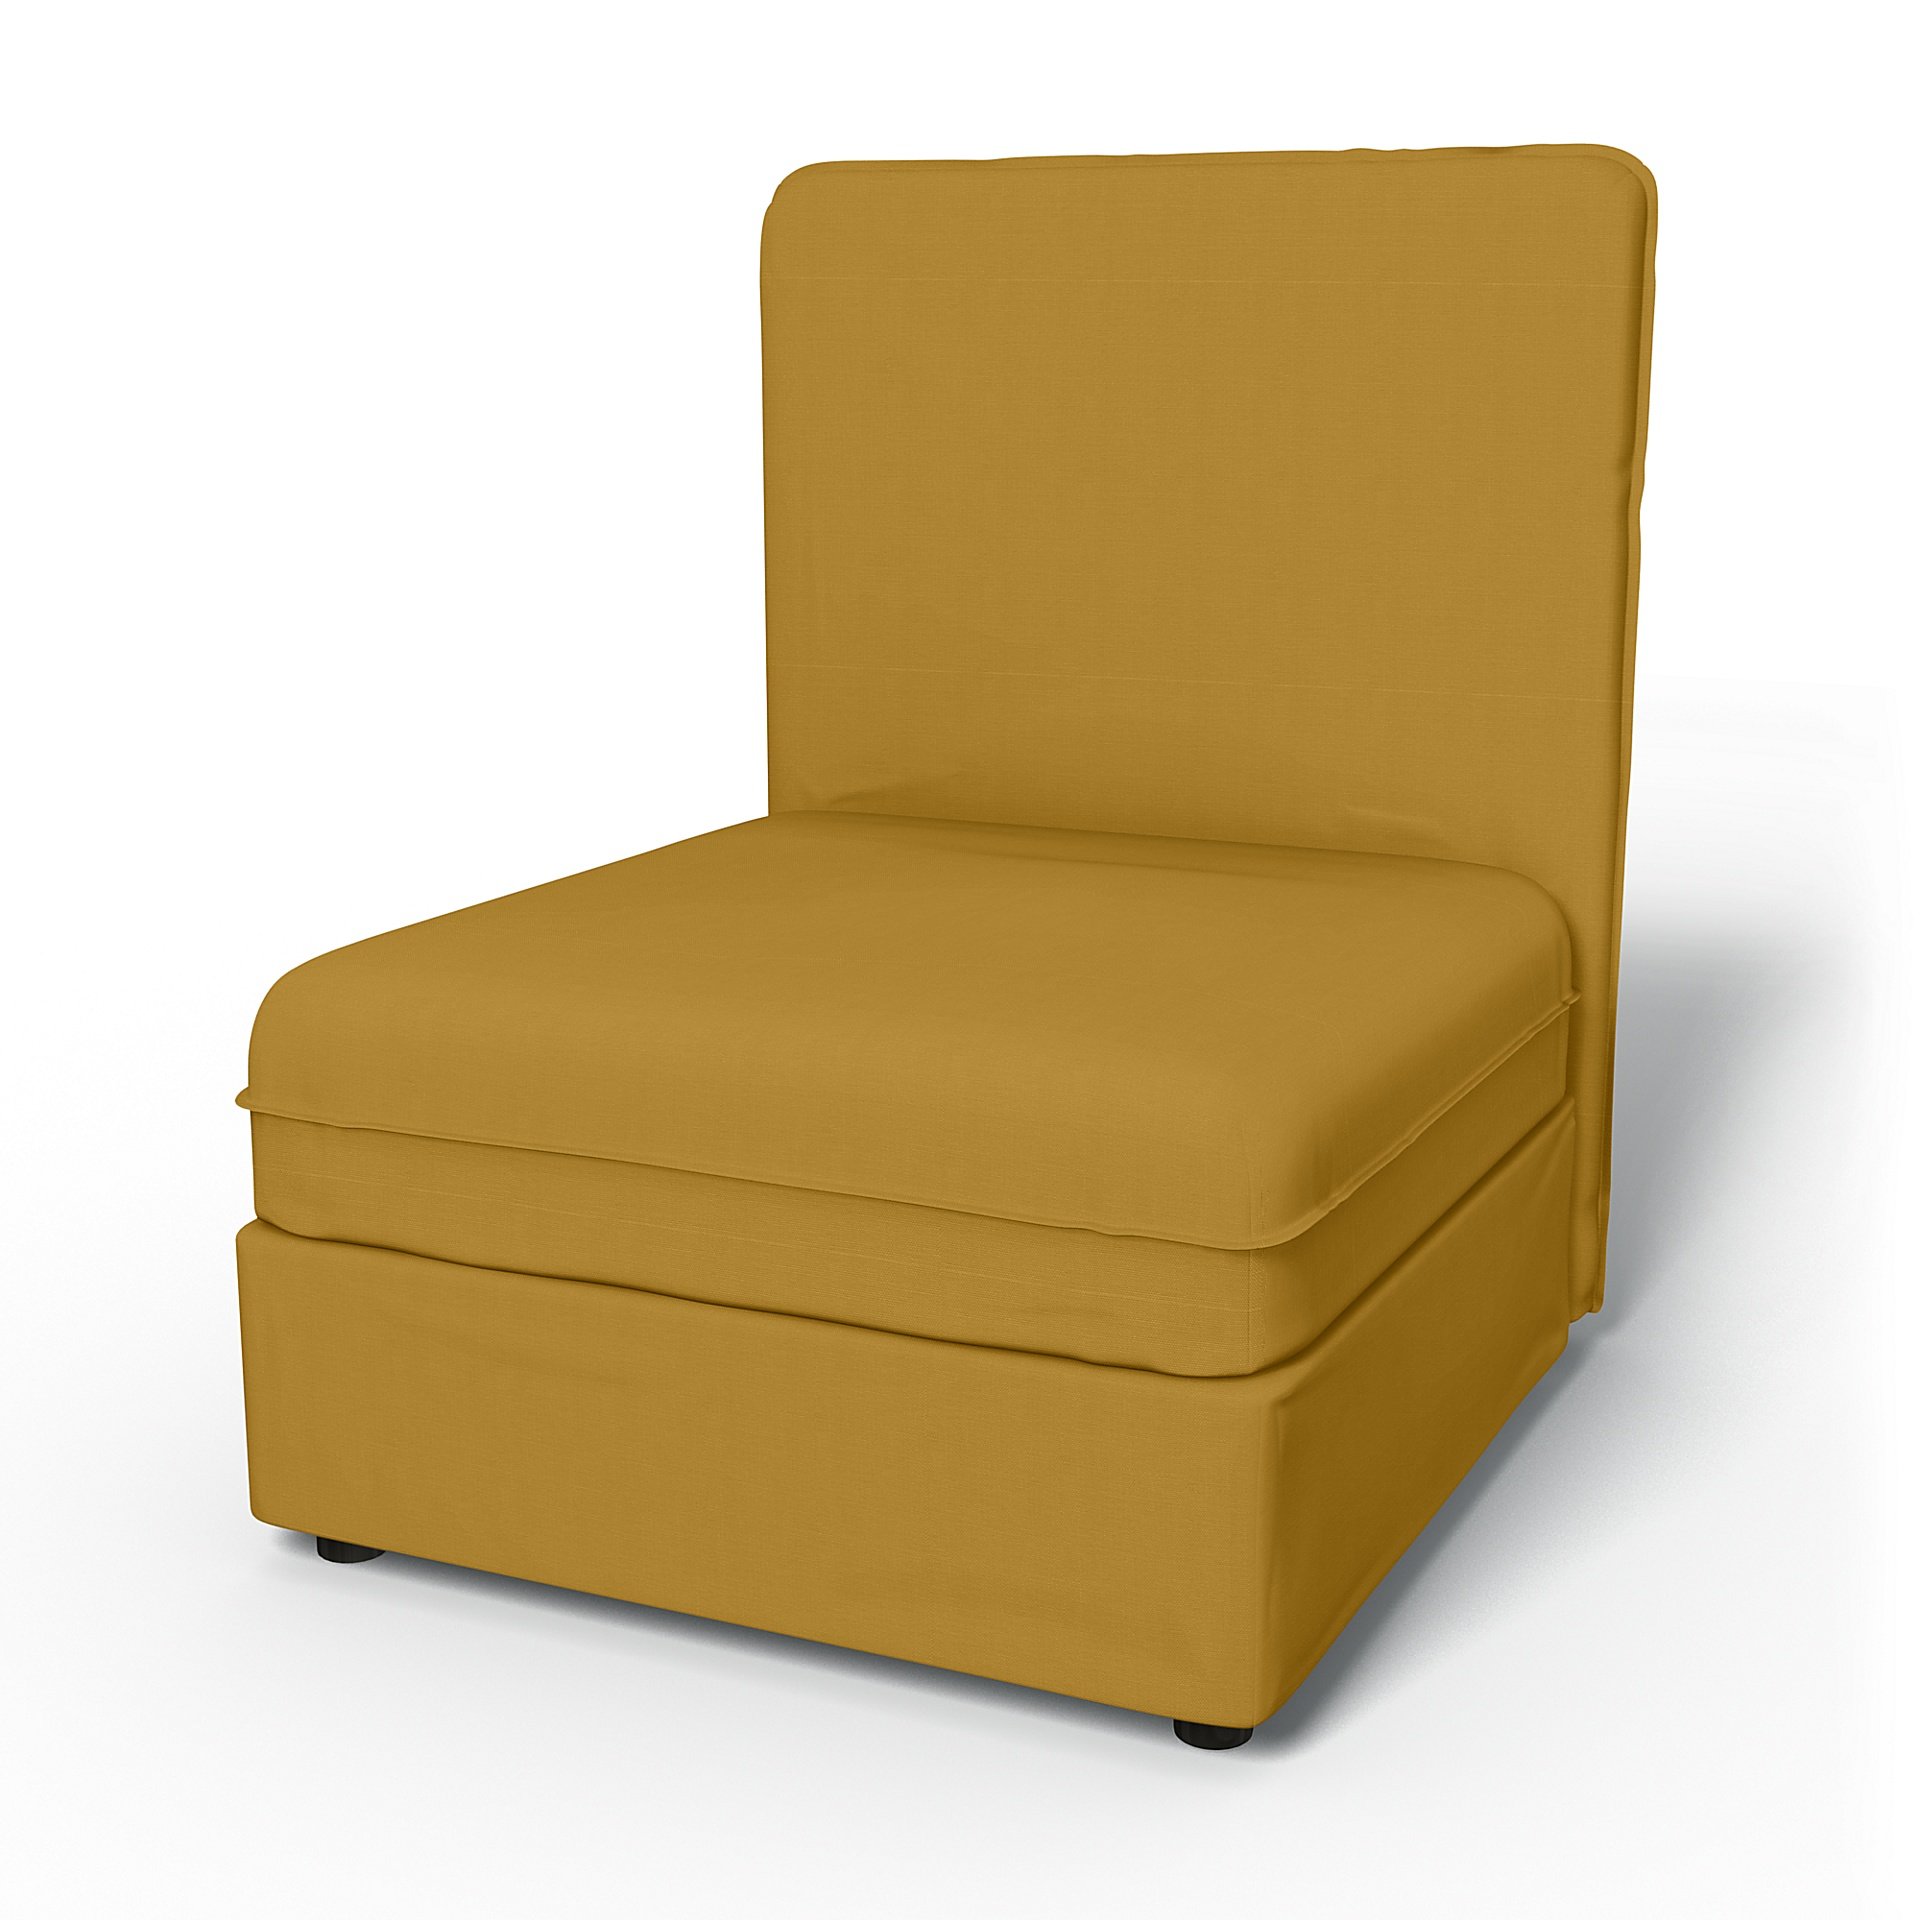 IKEA - Vallentuna Seat Module with High Back and Storage Cover 80x100cm 32x39in, Honey Mustard, Cott